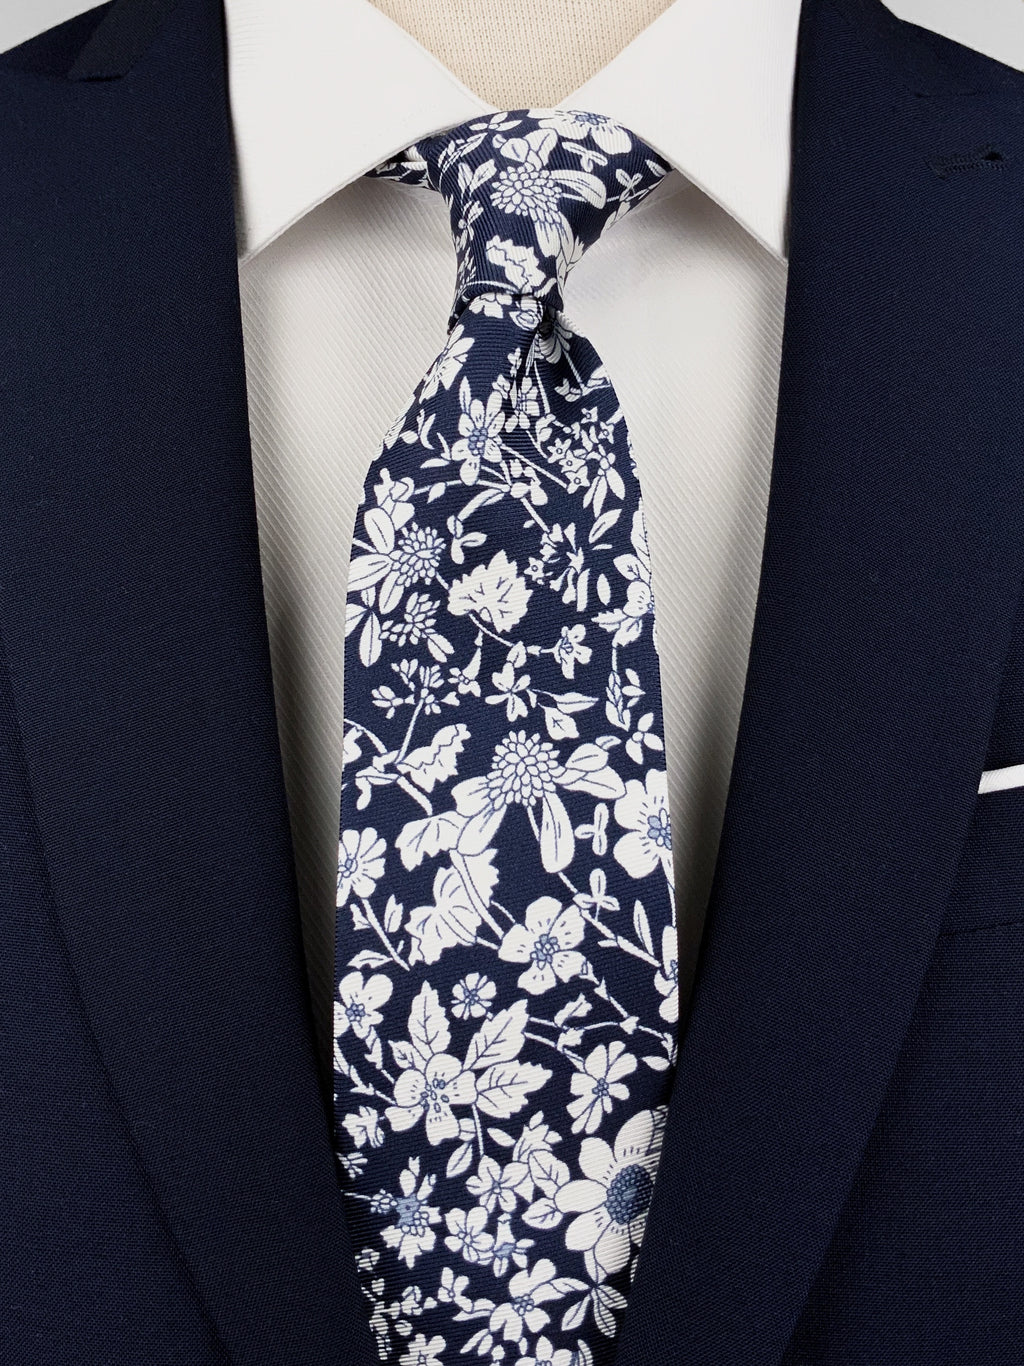 Navy blue mulberry silk twill tie with a white floral print worn with a white shirt and a navy blue suit